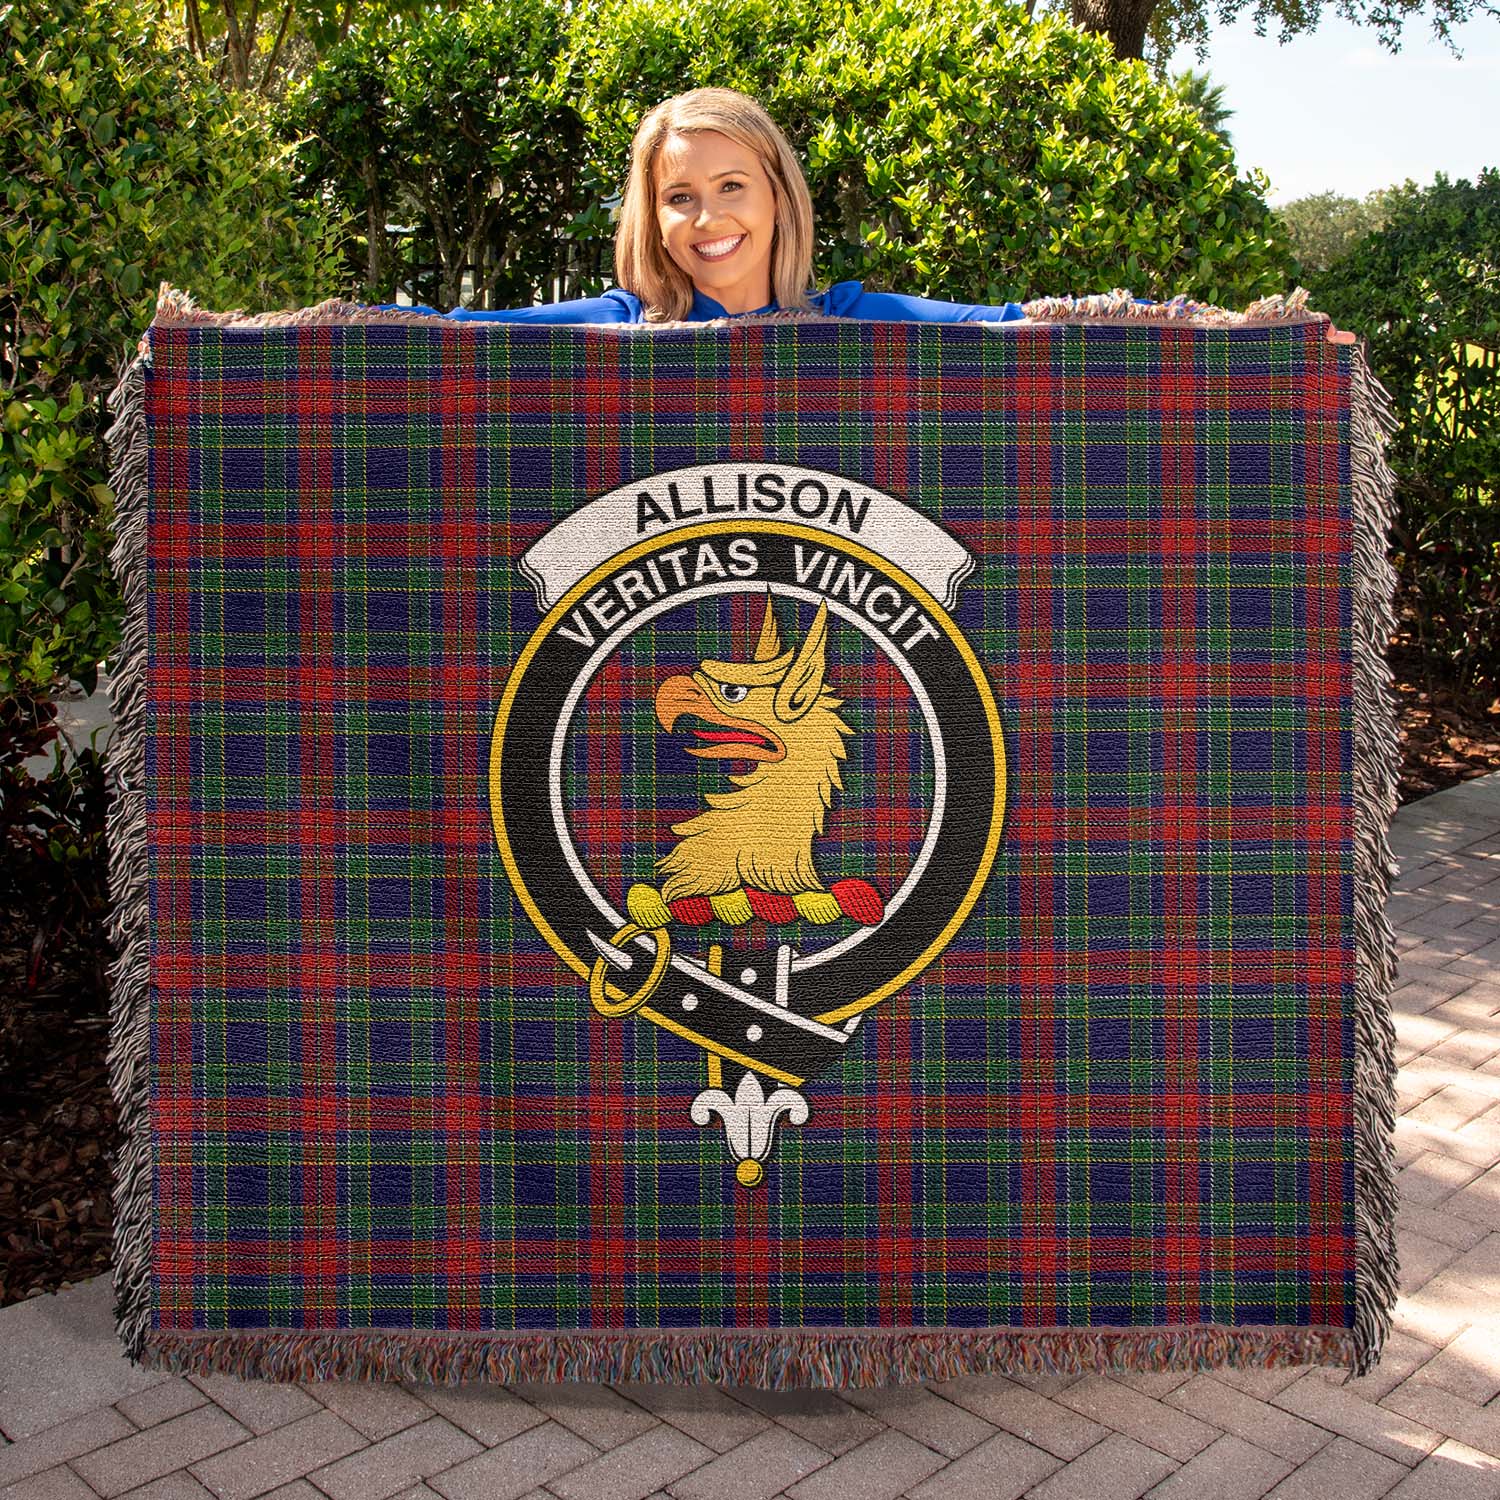 Tartan Vibes Clothing Allison Red Tartan Woven Blanket with Family Crest